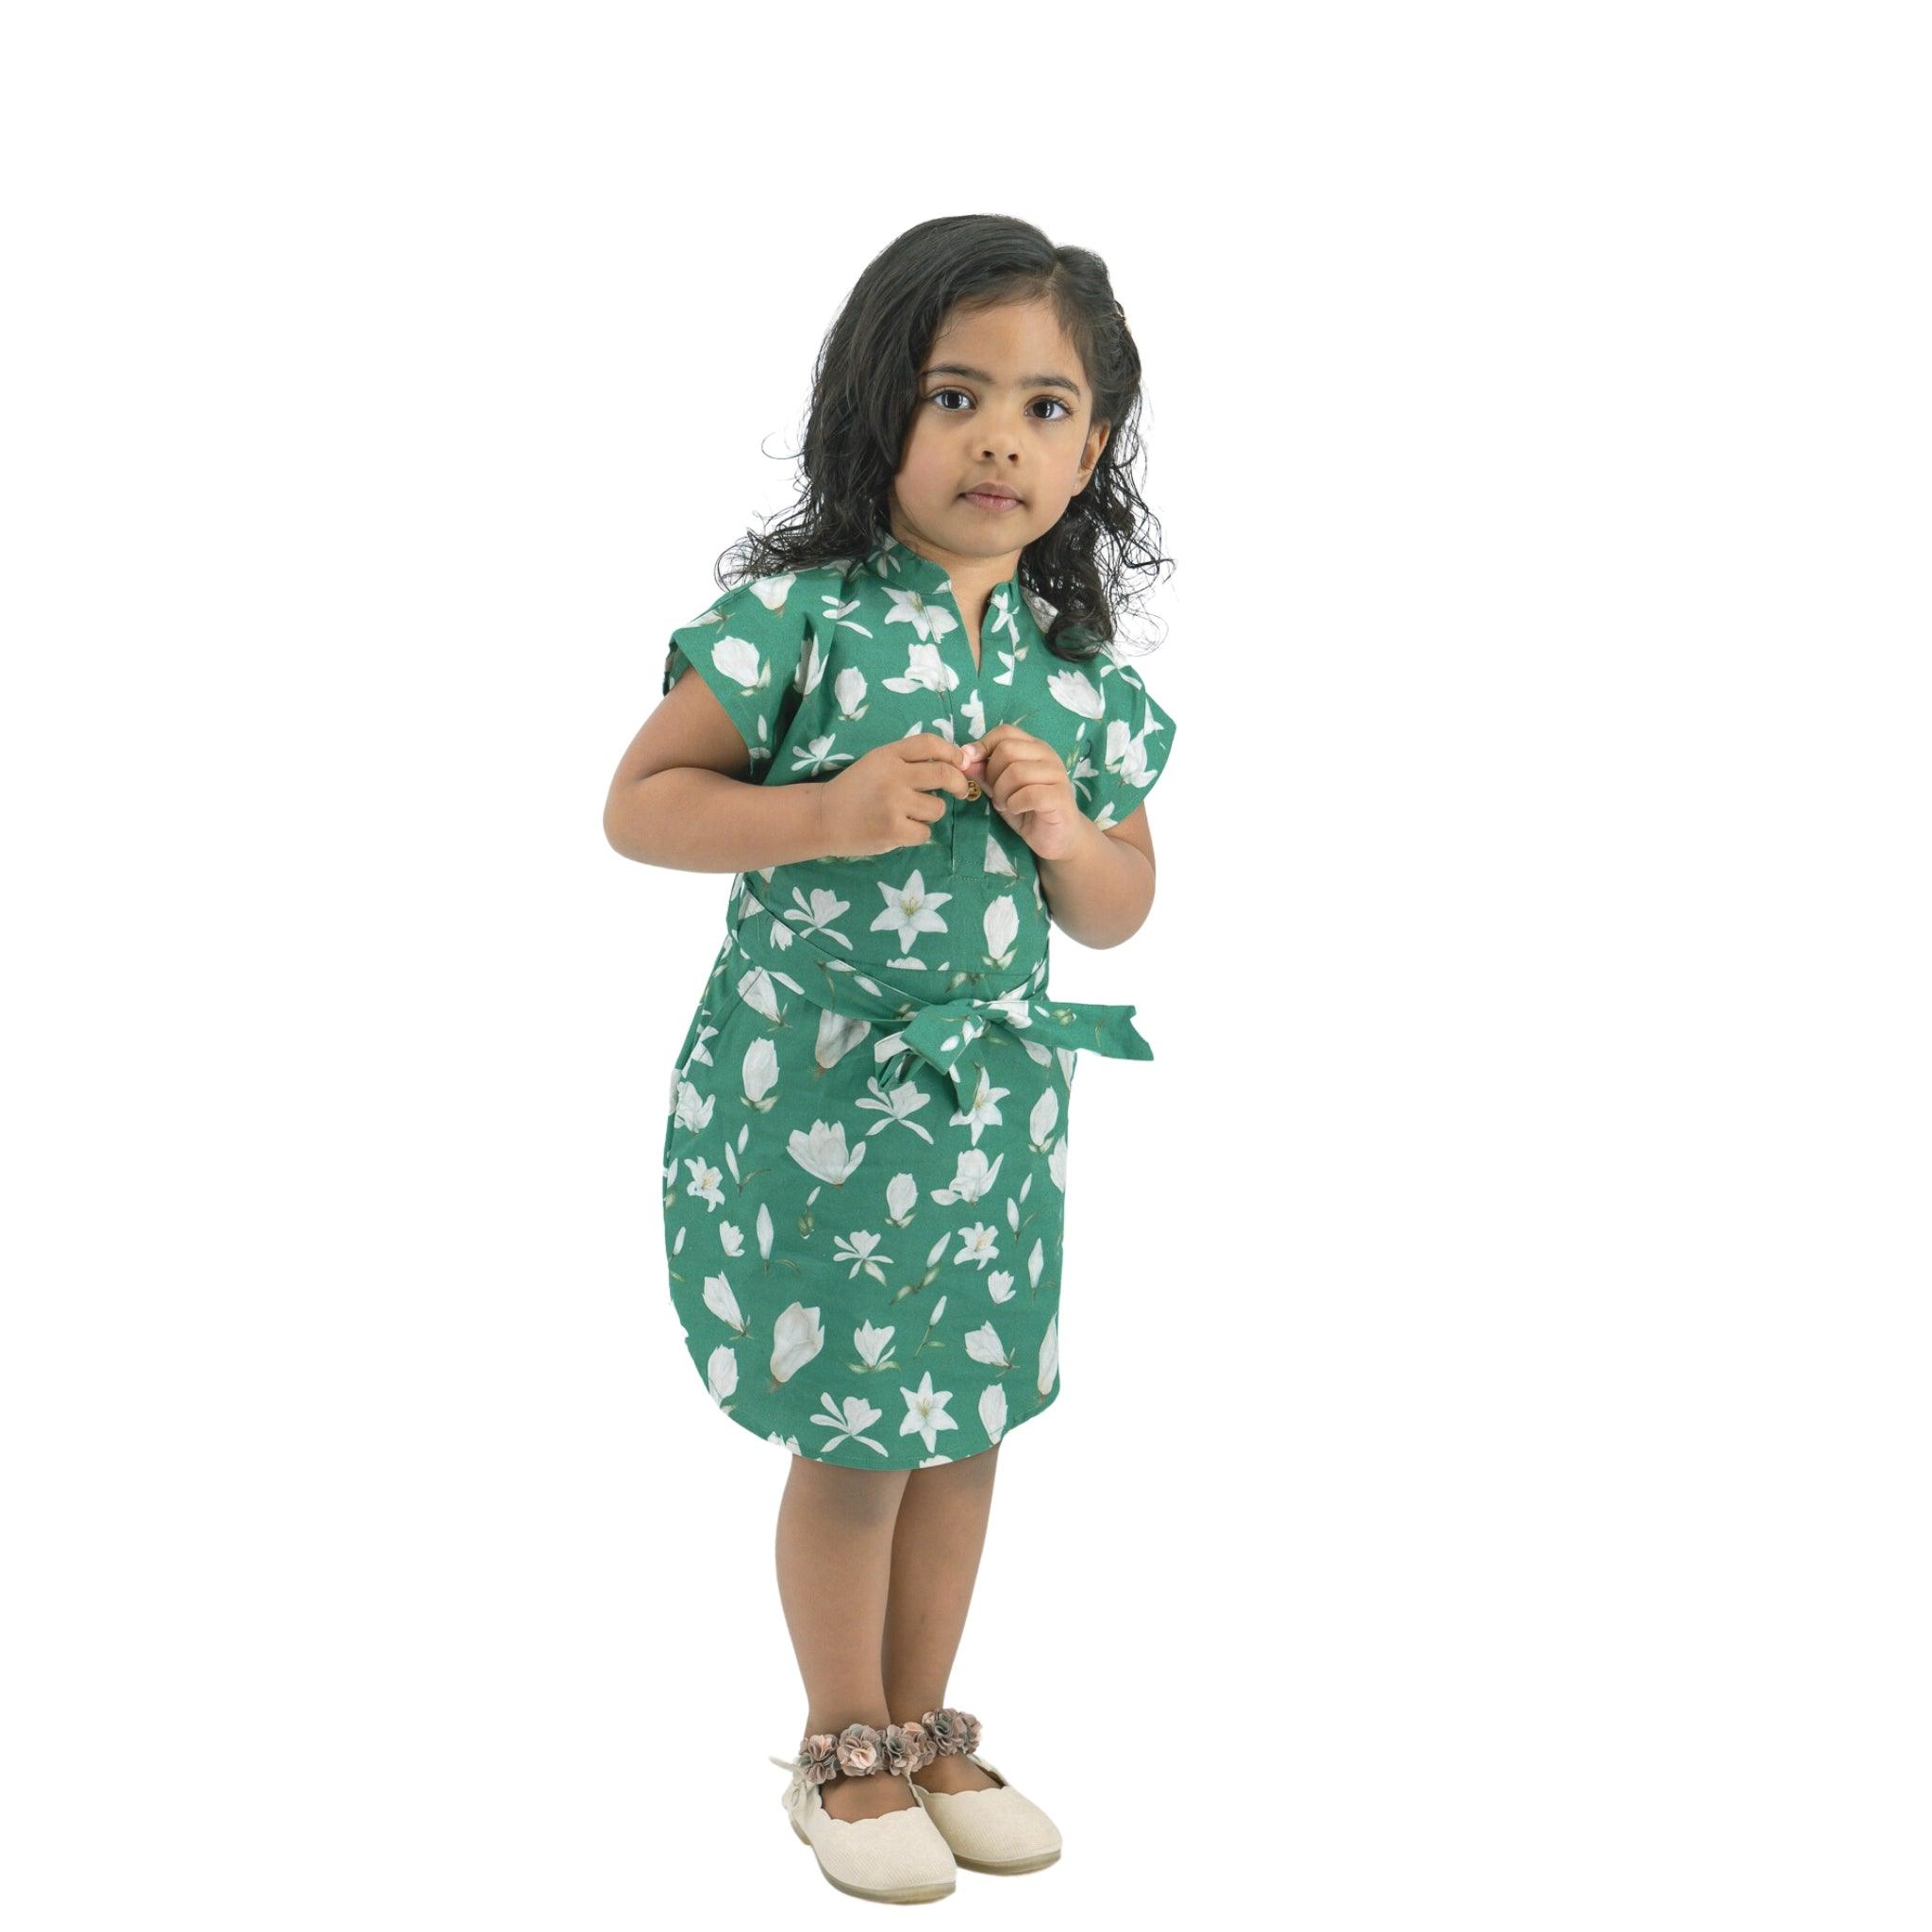 A young girl in a "Bottle Green Lilly Blossom Cotton Shirt Dress for Kids" by Karee and white shoes standing against a white background, looking to the side.